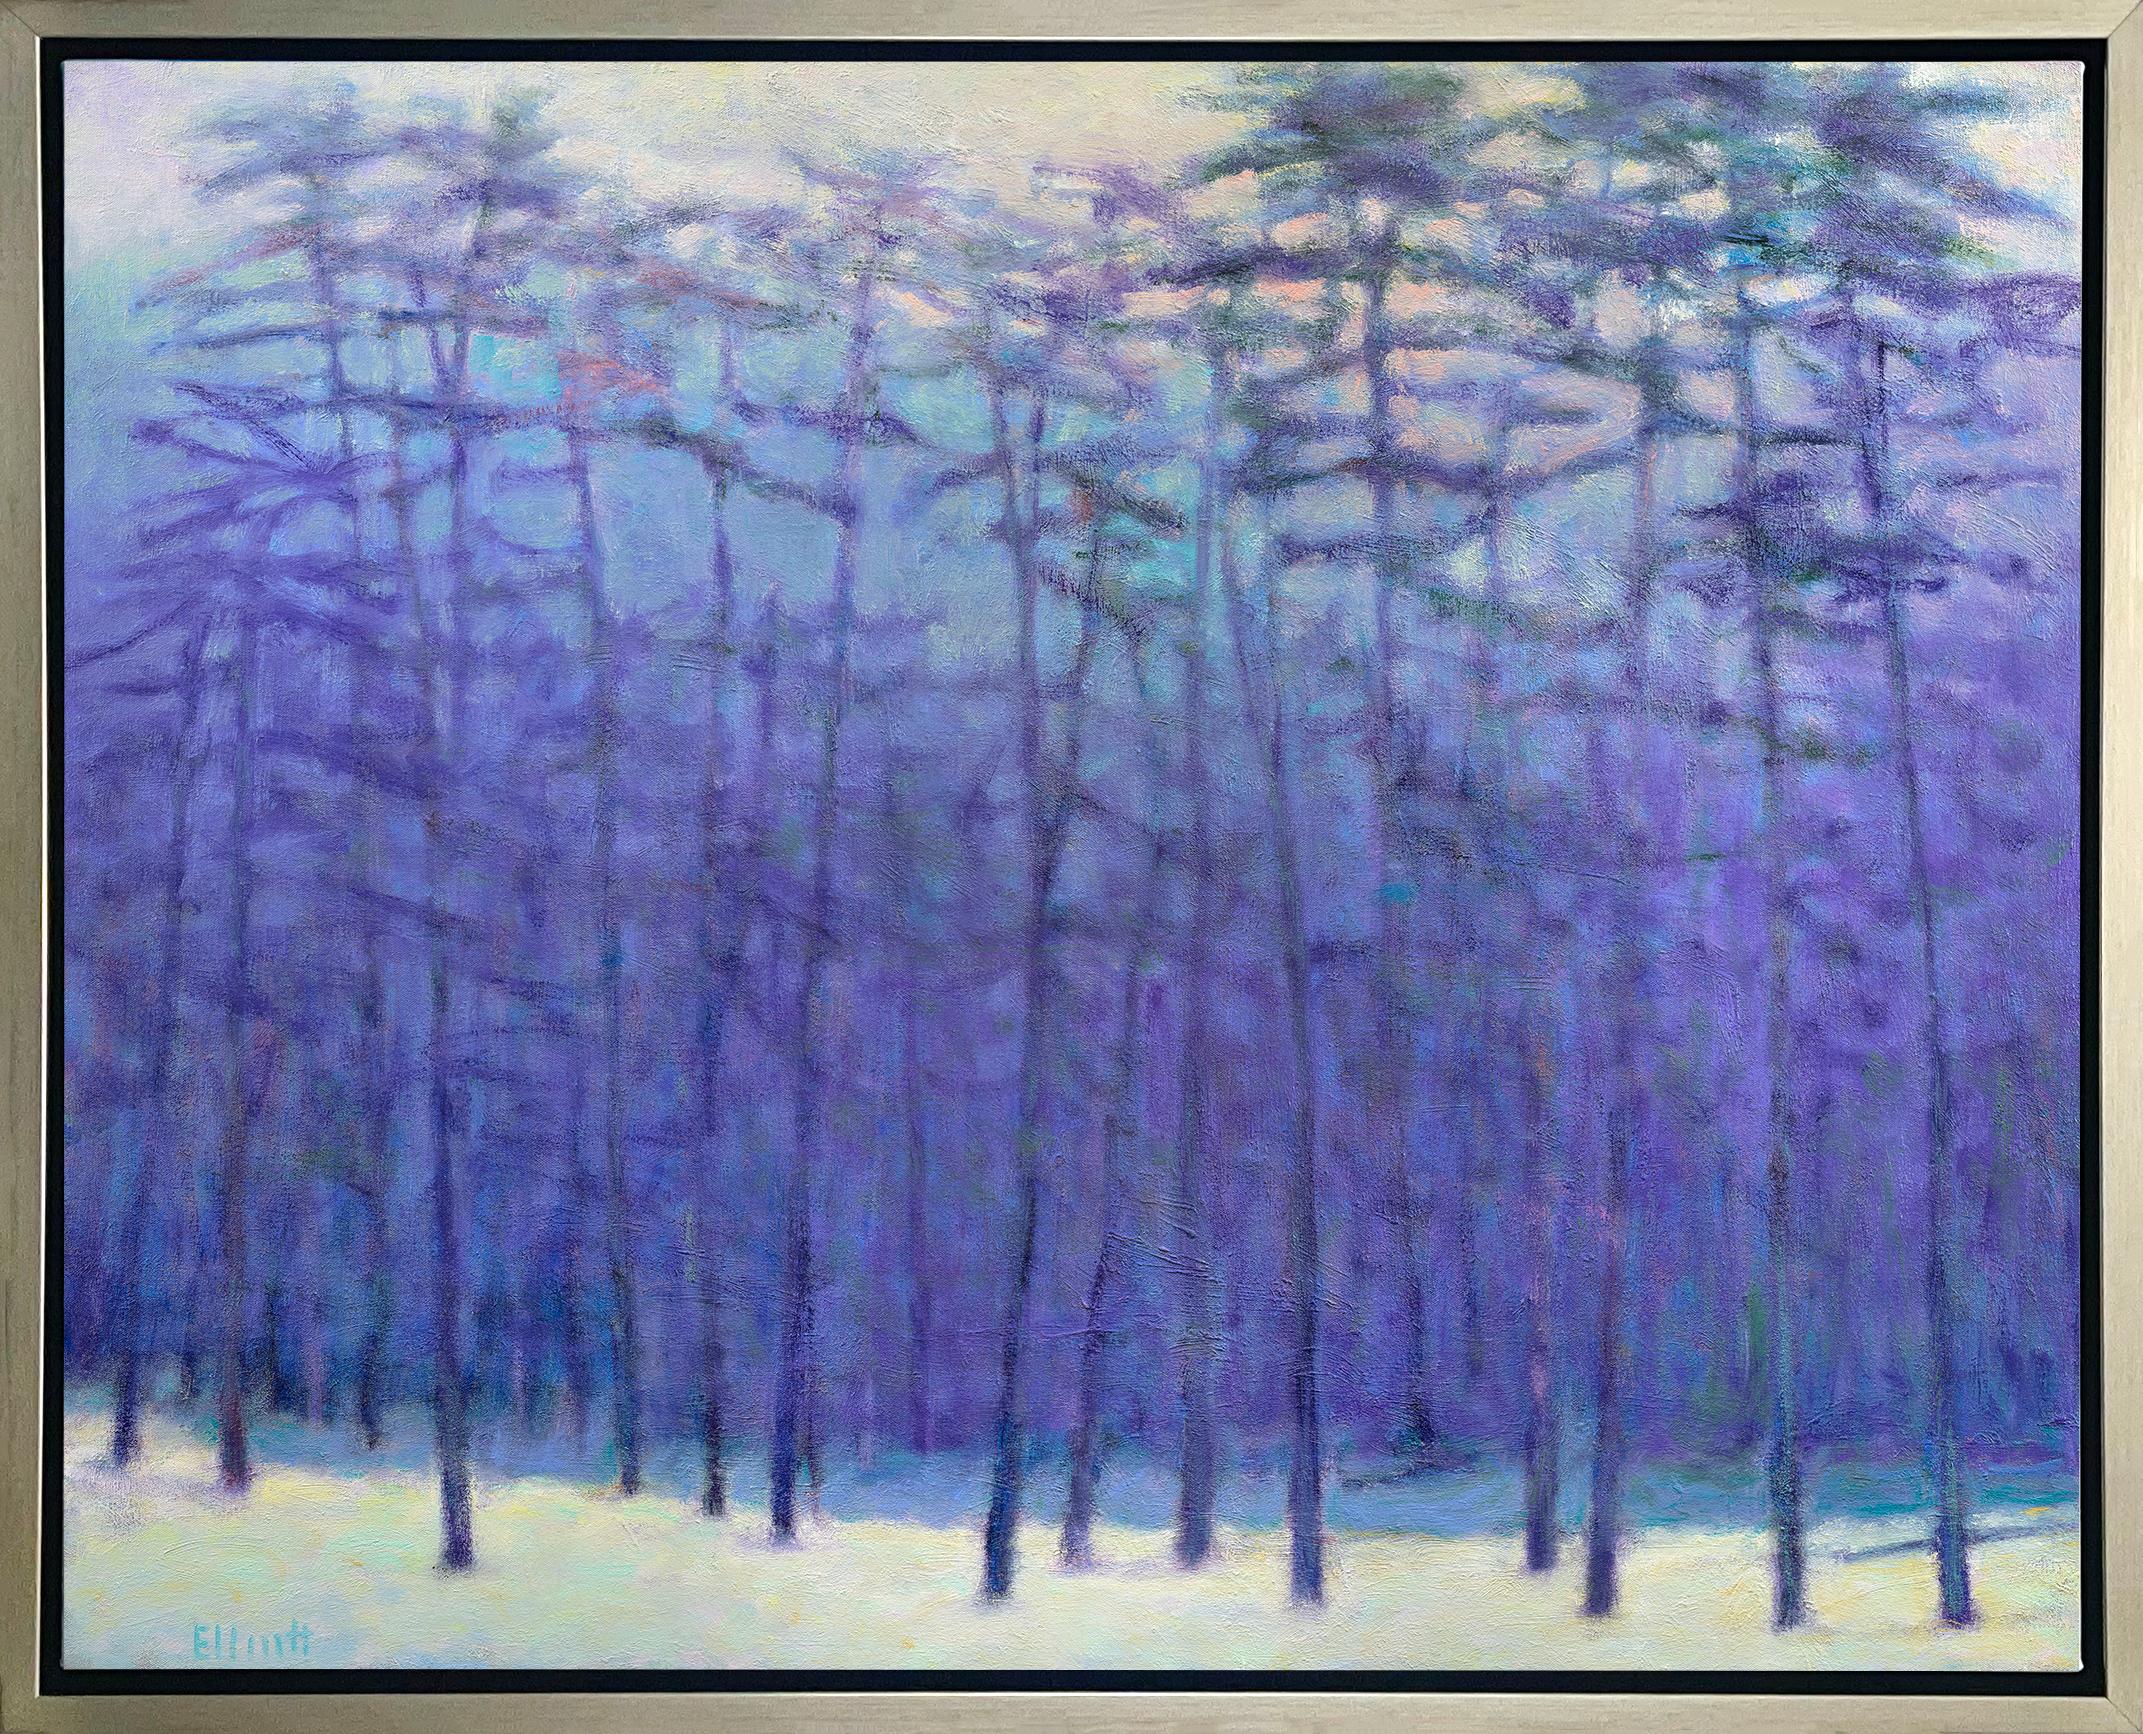 Ken Elliott Abstract Print - "Haze in the Forest, " Framed Limited Edition Giclee Print, 40" x 50"